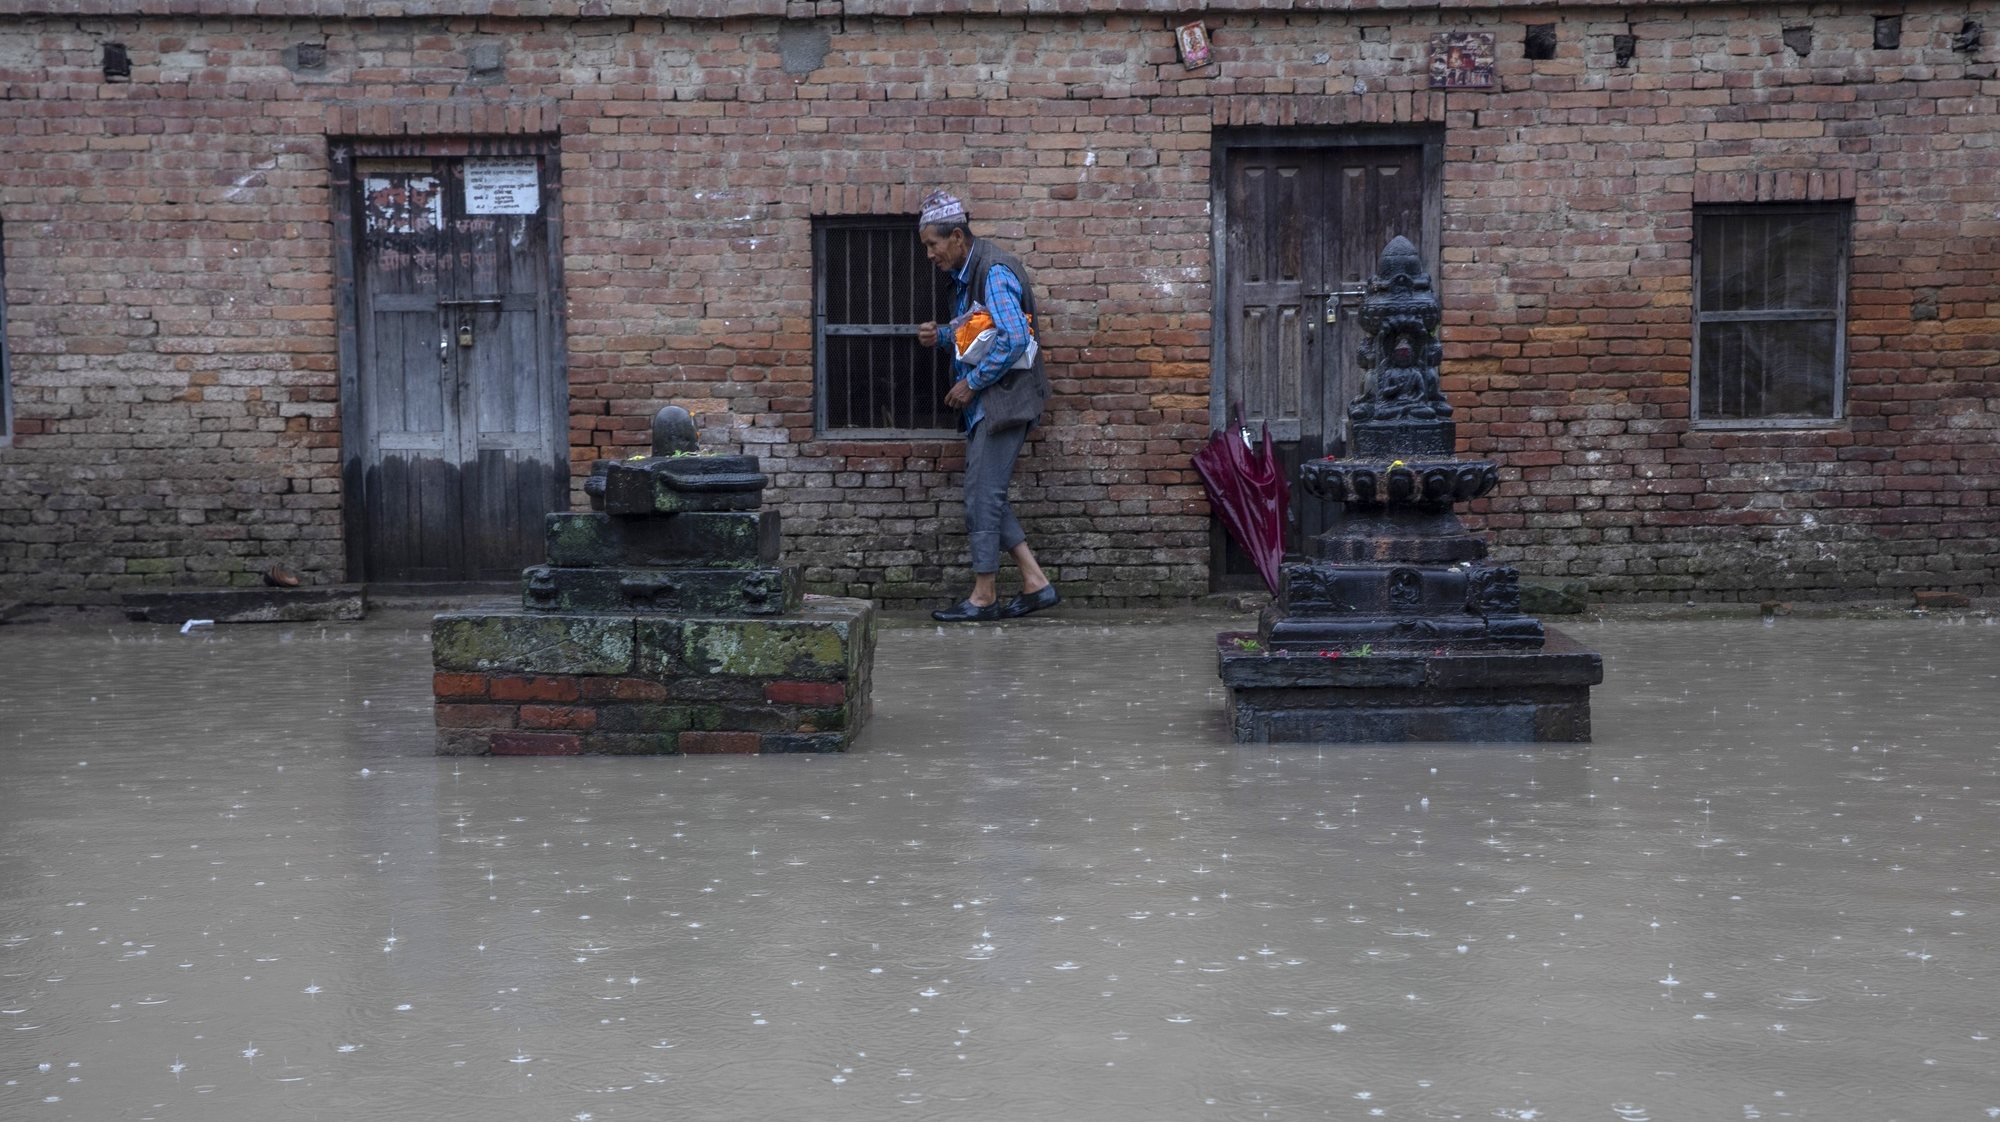 epa11462161 The temples area is flooded as Hanumante River rises following torrential rains in Bhaktapur, Nepal, 06 July 2024. Nepal&#039;s National Disaster Risk Reduction and Management Authority (NDRRMA) warned of heavy monsoon rains that put several parts of the country at risk of floods and landslides. According to the statement issued by NDRRMA, at least 28 people have died in monsoon related disasters since mid-June 2024  EPA/NARENDRA SHRESTHA